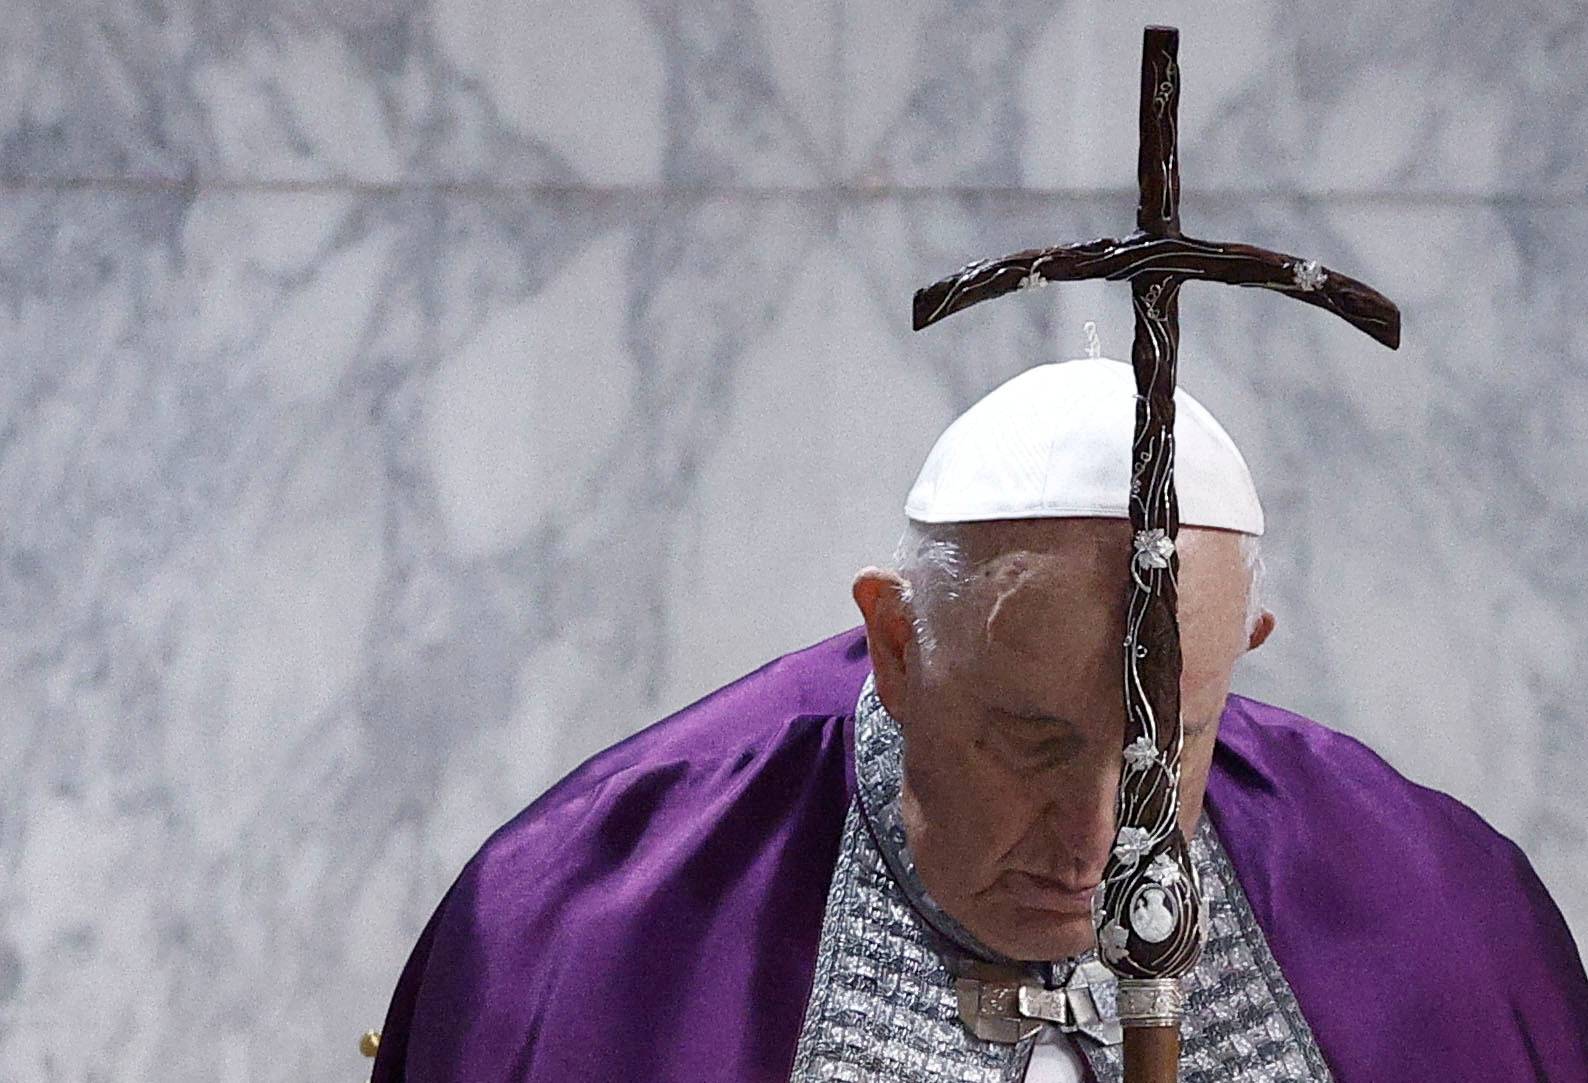 Pope attends Ash Wednesday mass at Church of Santa Sabina in Rome